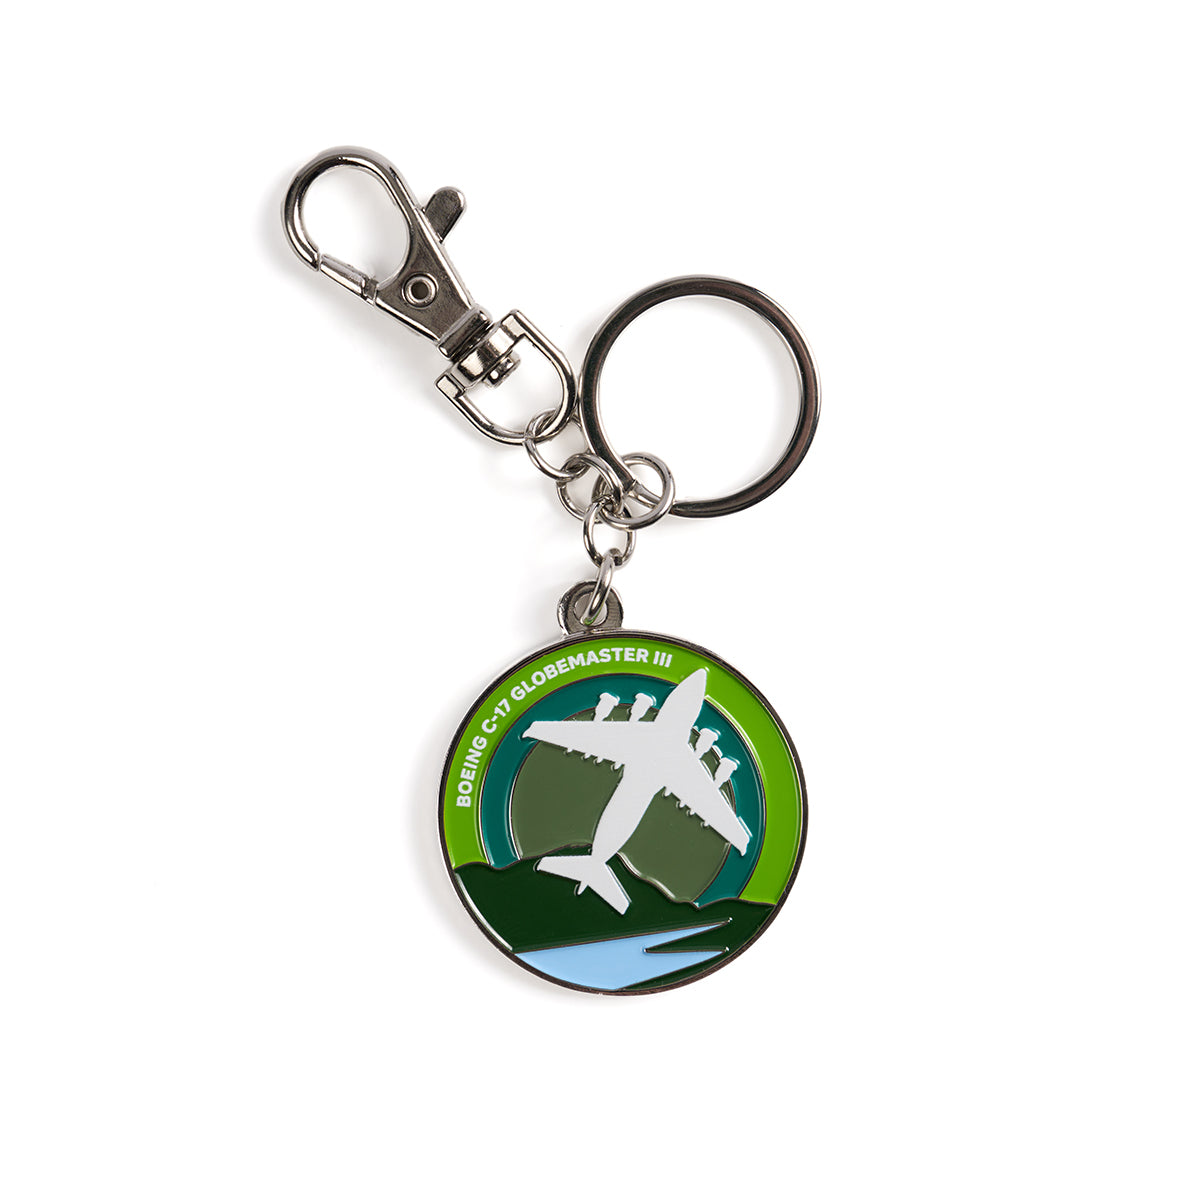 Skyward keychain, featuring the iconic Boeing C-17 Globemaster in a roundel design.